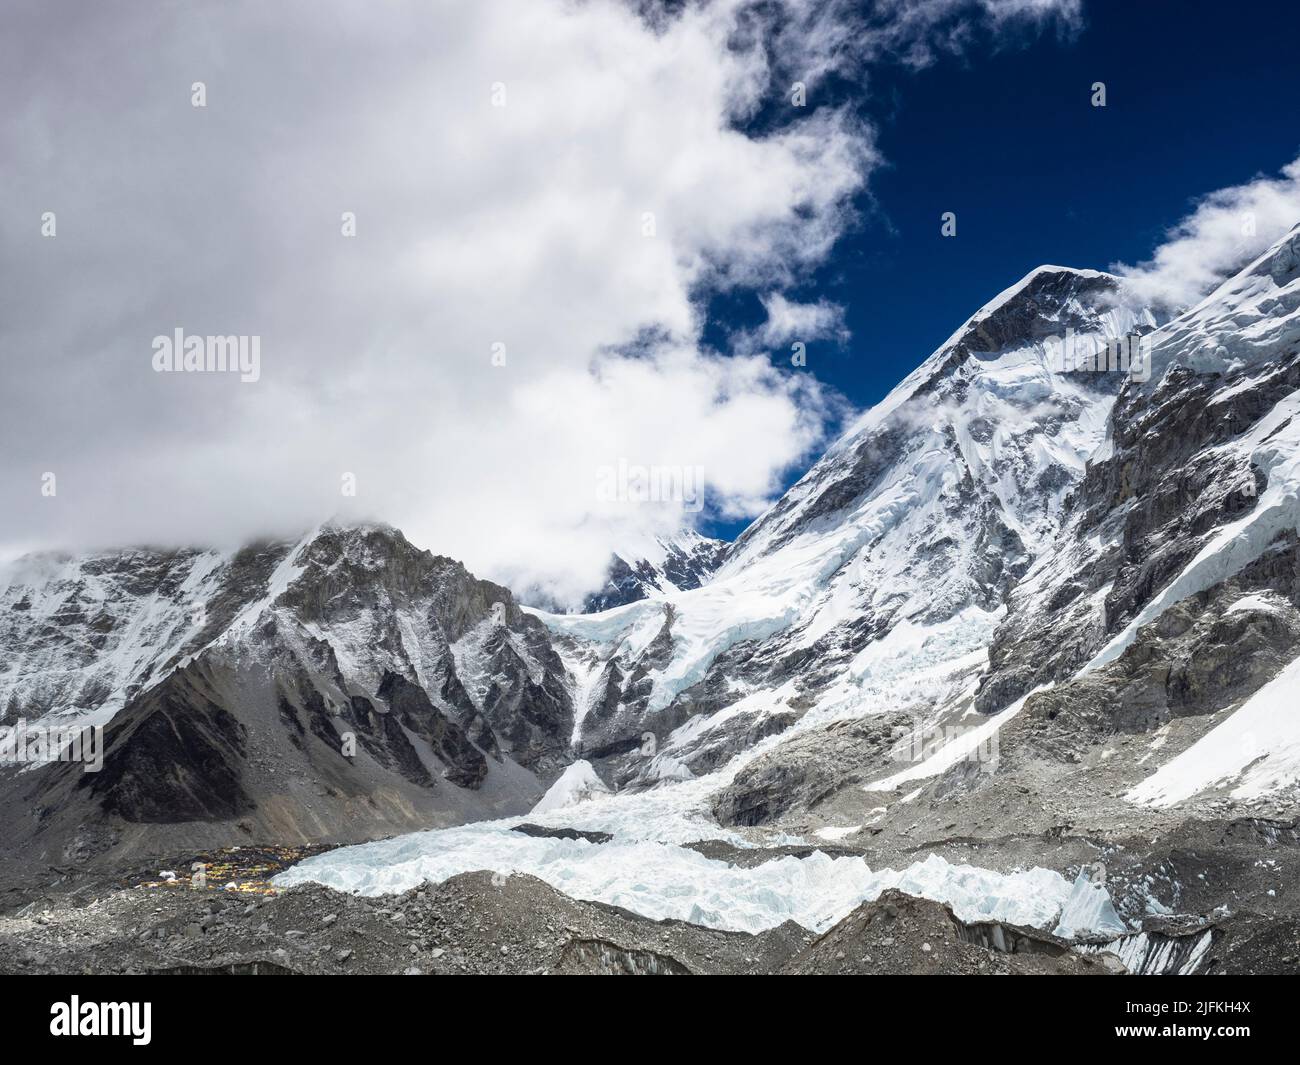 Everest Base Camp in the distance at the left edge of the Khumbu Icefall. Khumbutse (6636m) (l), and the West Shoulder are visible, Stock Photo